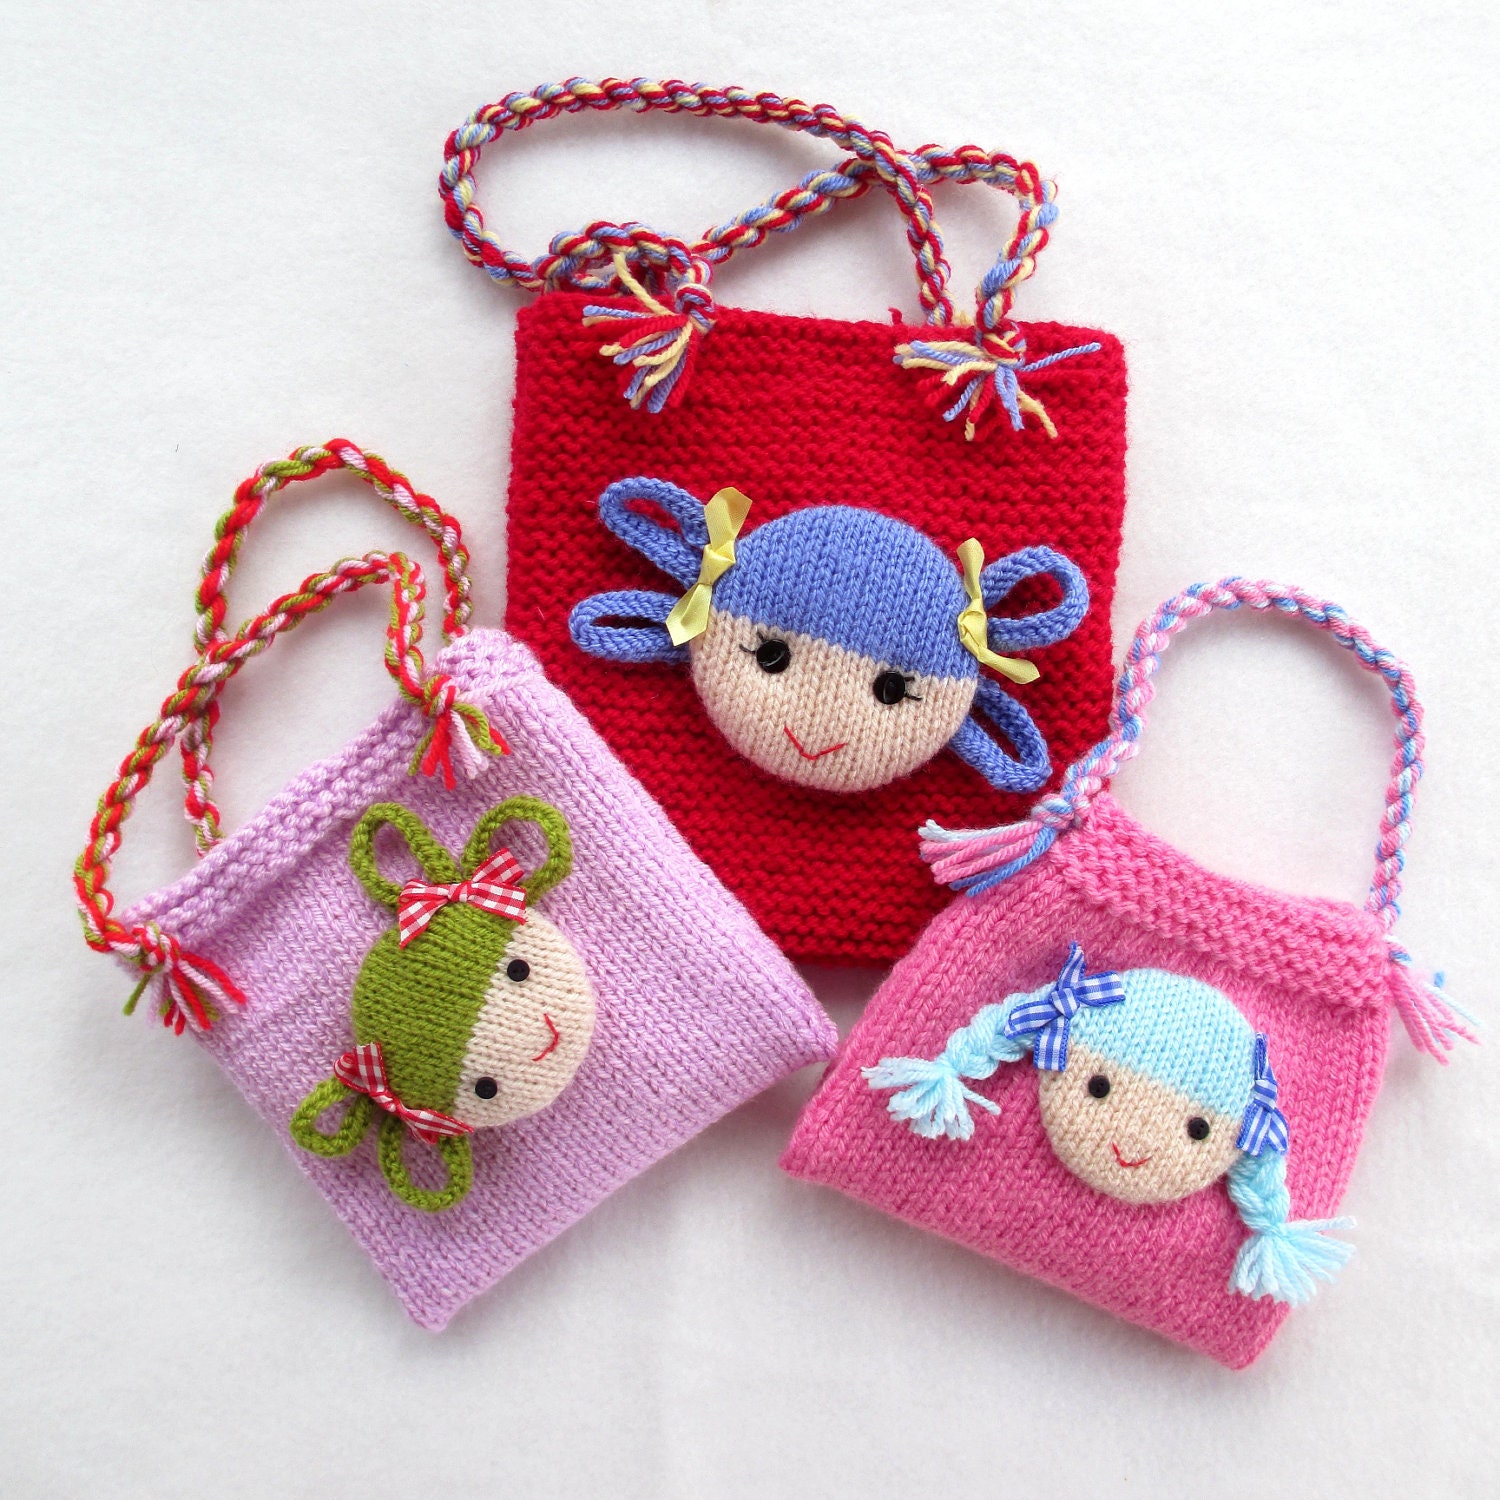 Free Purse Knitting Patterns - Double Seed Stitch Coin Purse